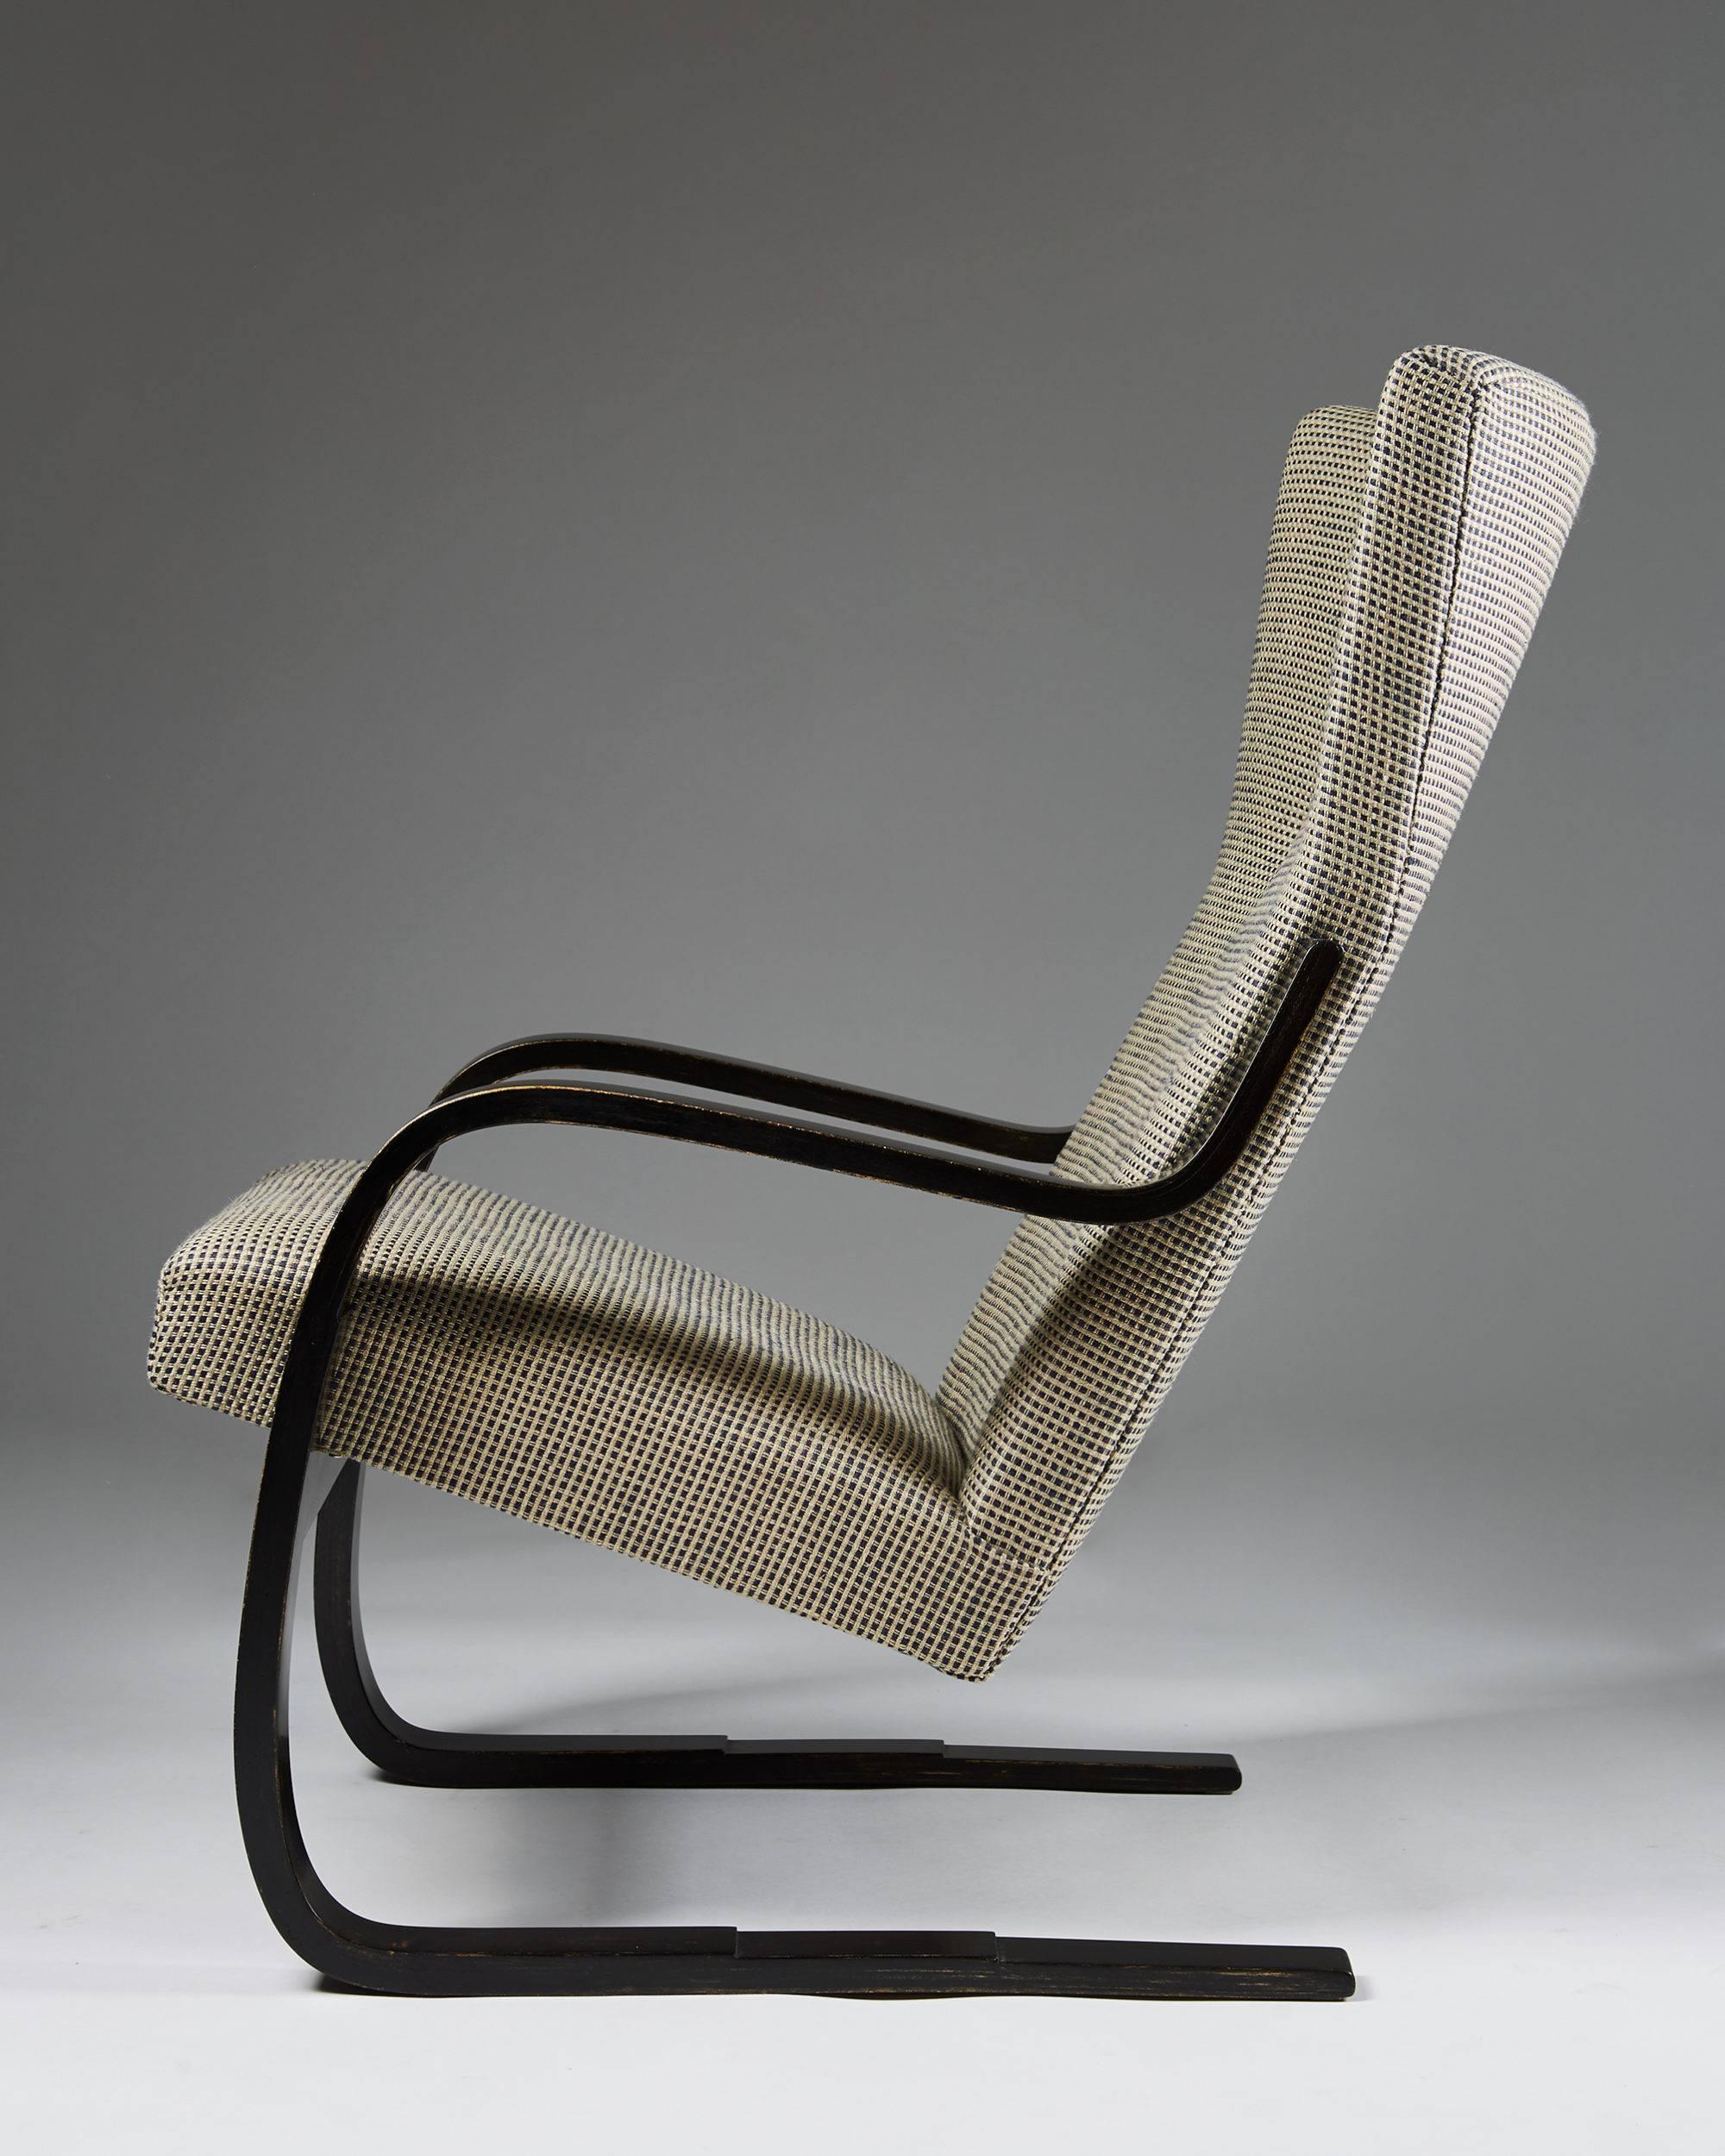 Armchair designed by Alvar Aalto for Huonekalu-Ja Rakennustyötehdas Oy, 
Finland, 1932-1933.

Lacquered beech, cotton and lined upholstery.

Measures: H: 94 cm/ 37''
W: 62 cm/ 24 1/2''
D: 85 cm/ 33 1/2''
Seat height: 44 cm/ 17